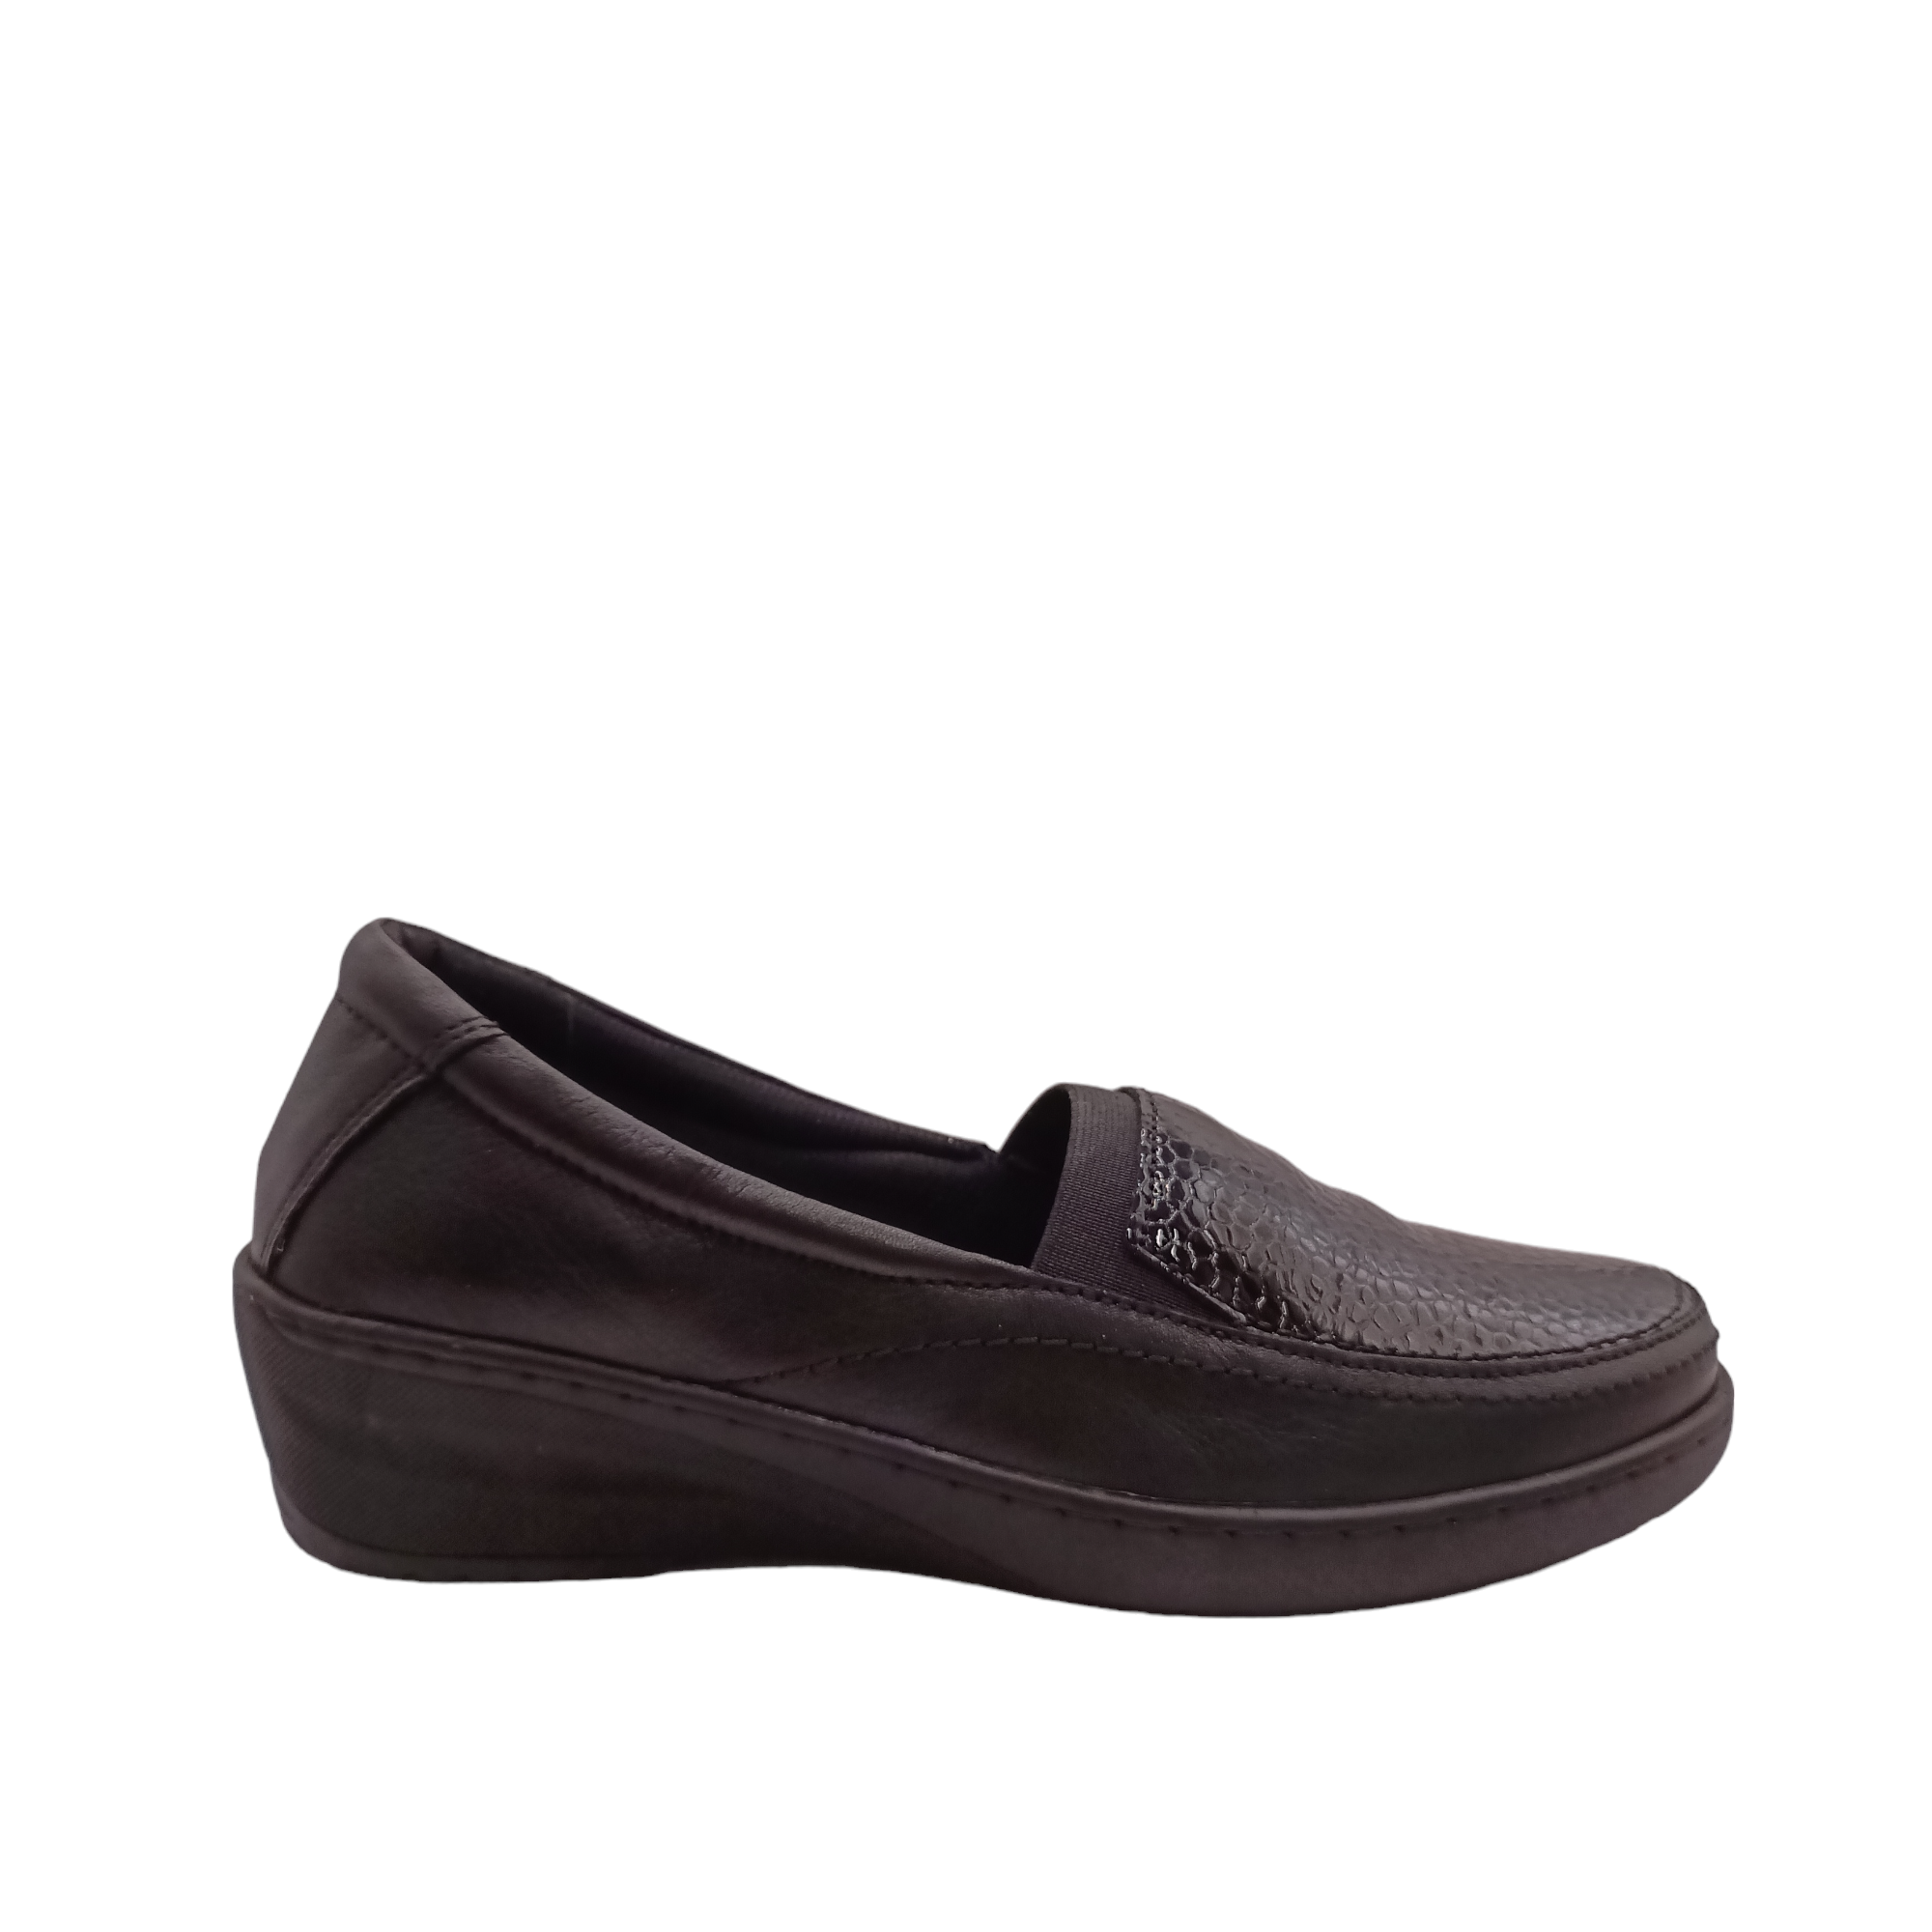 Shop CP149-18 Cabello - with shoe&amp;me - from Cabello - Shoes - Shoe, Winter, Womens - [collection]